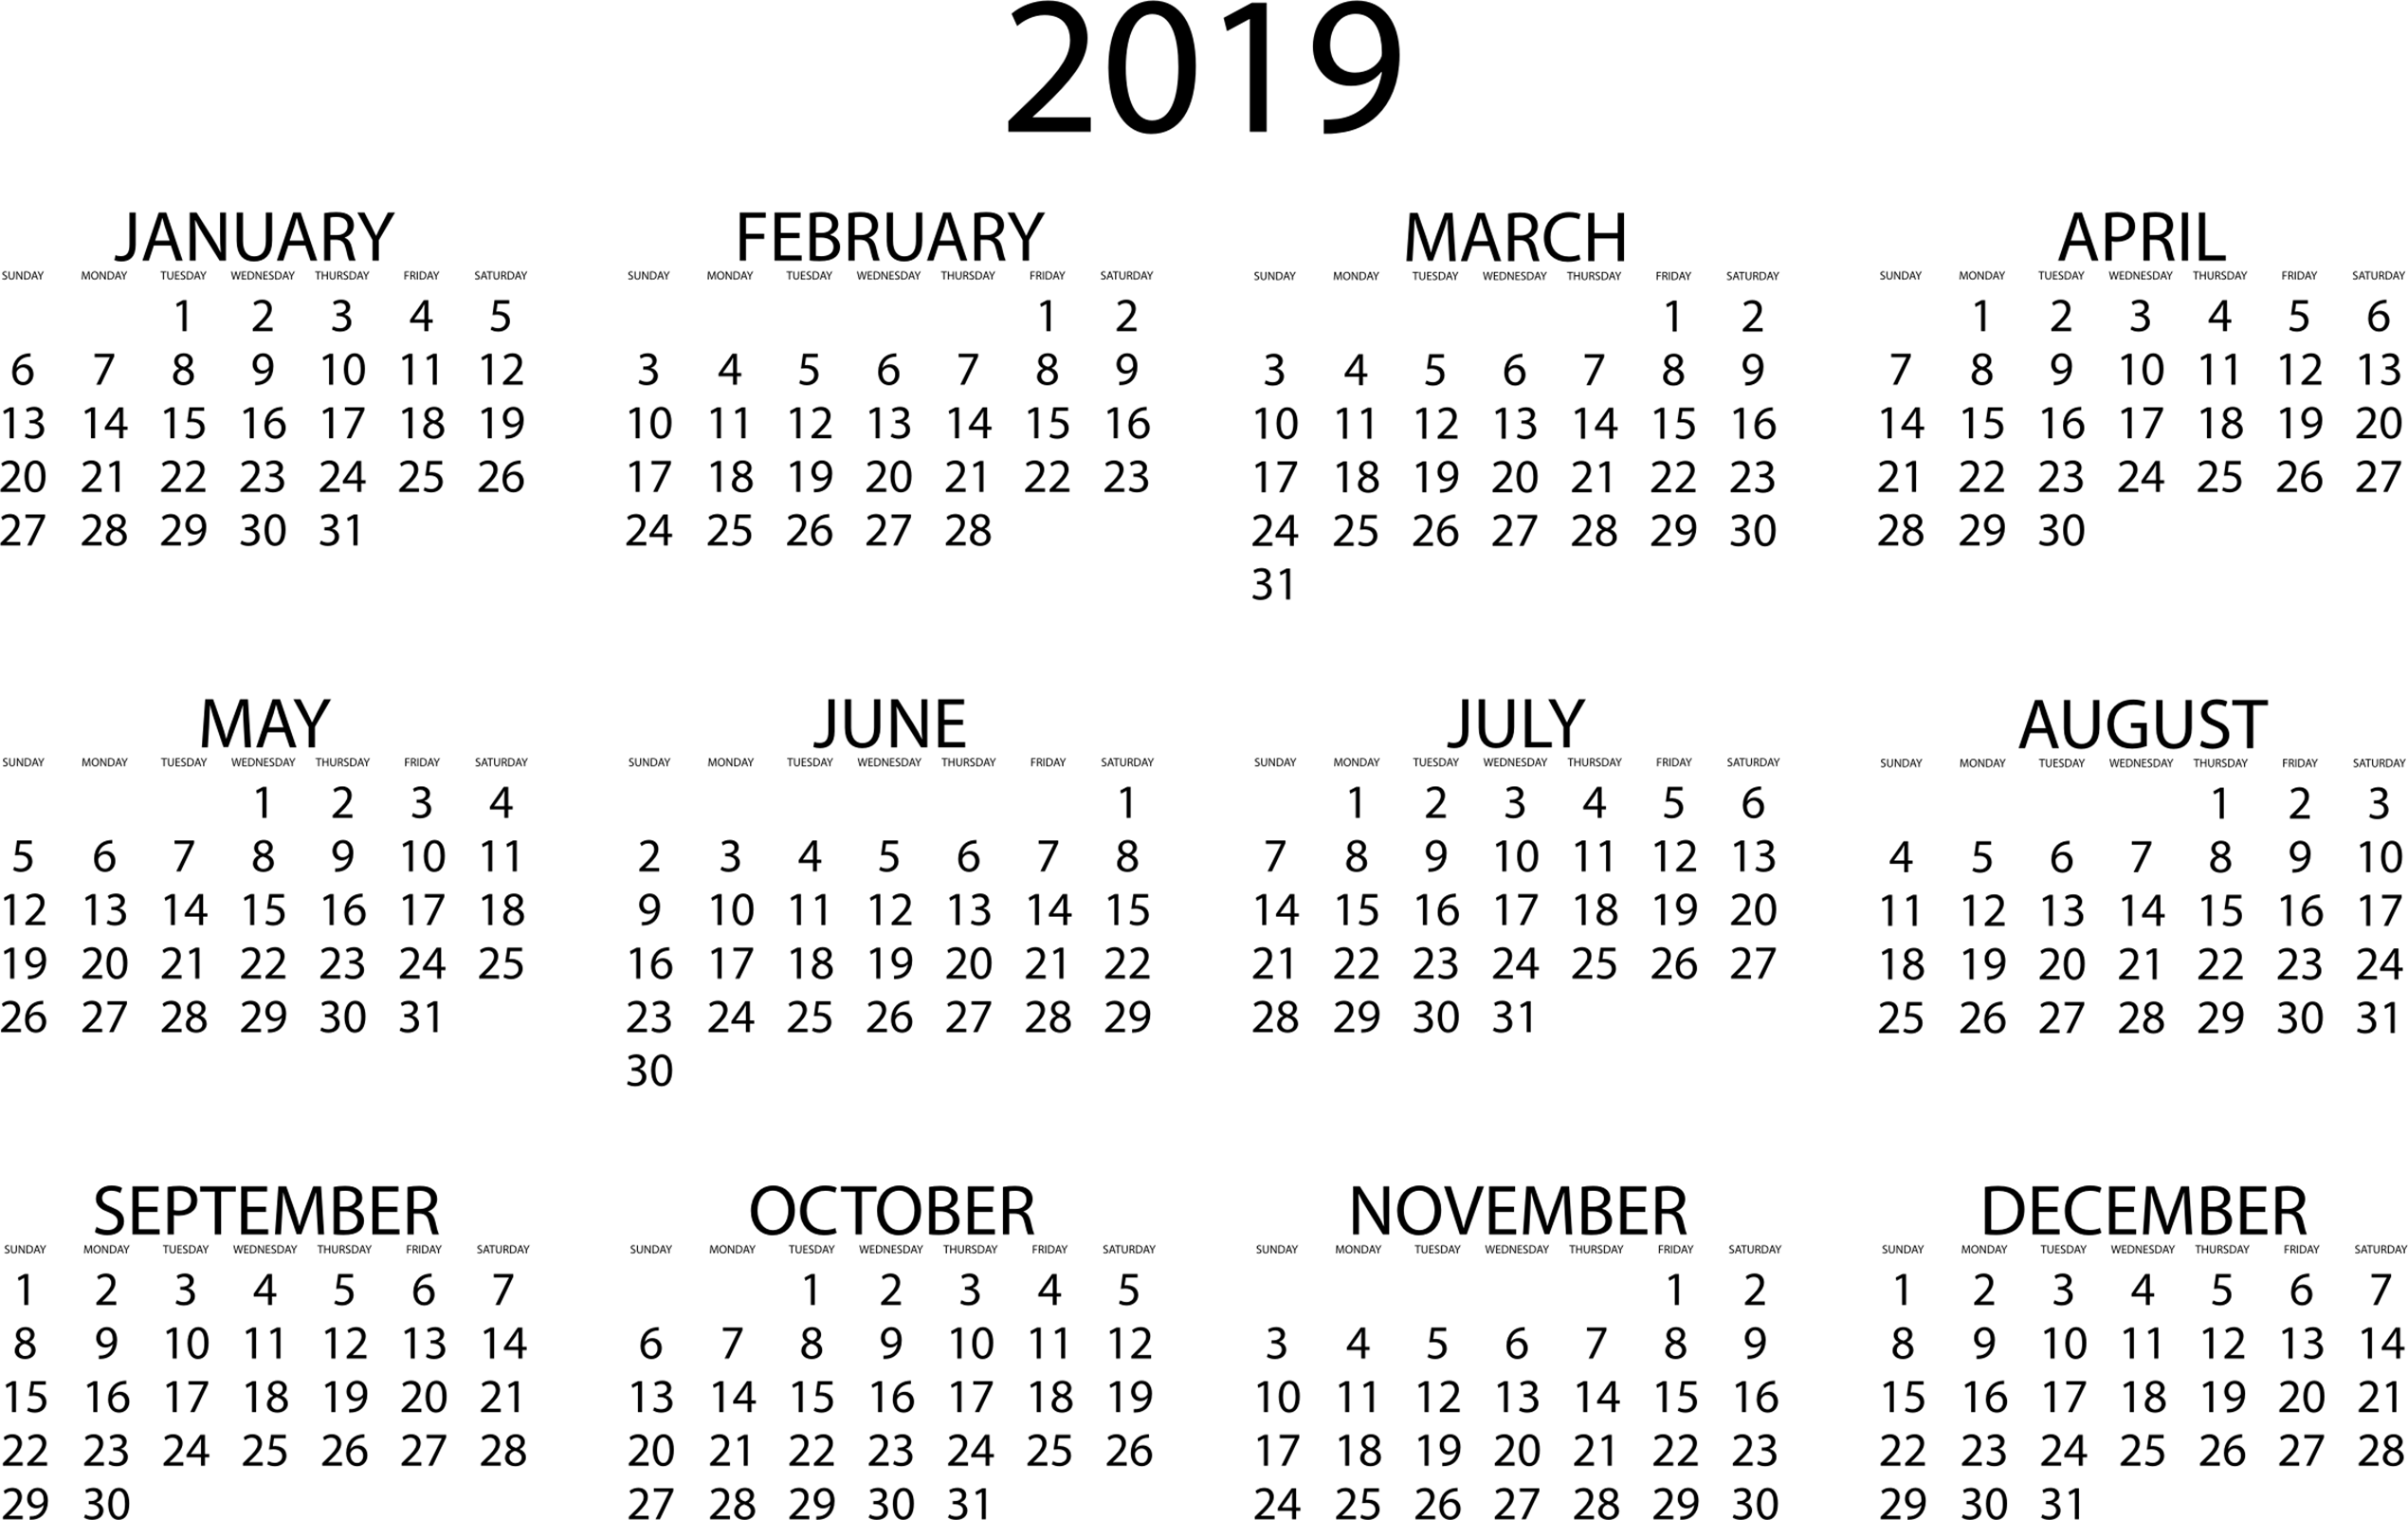 download-2019-calendar-transparent-01s-printable-2019-yearly-calendar-png-image-with-no